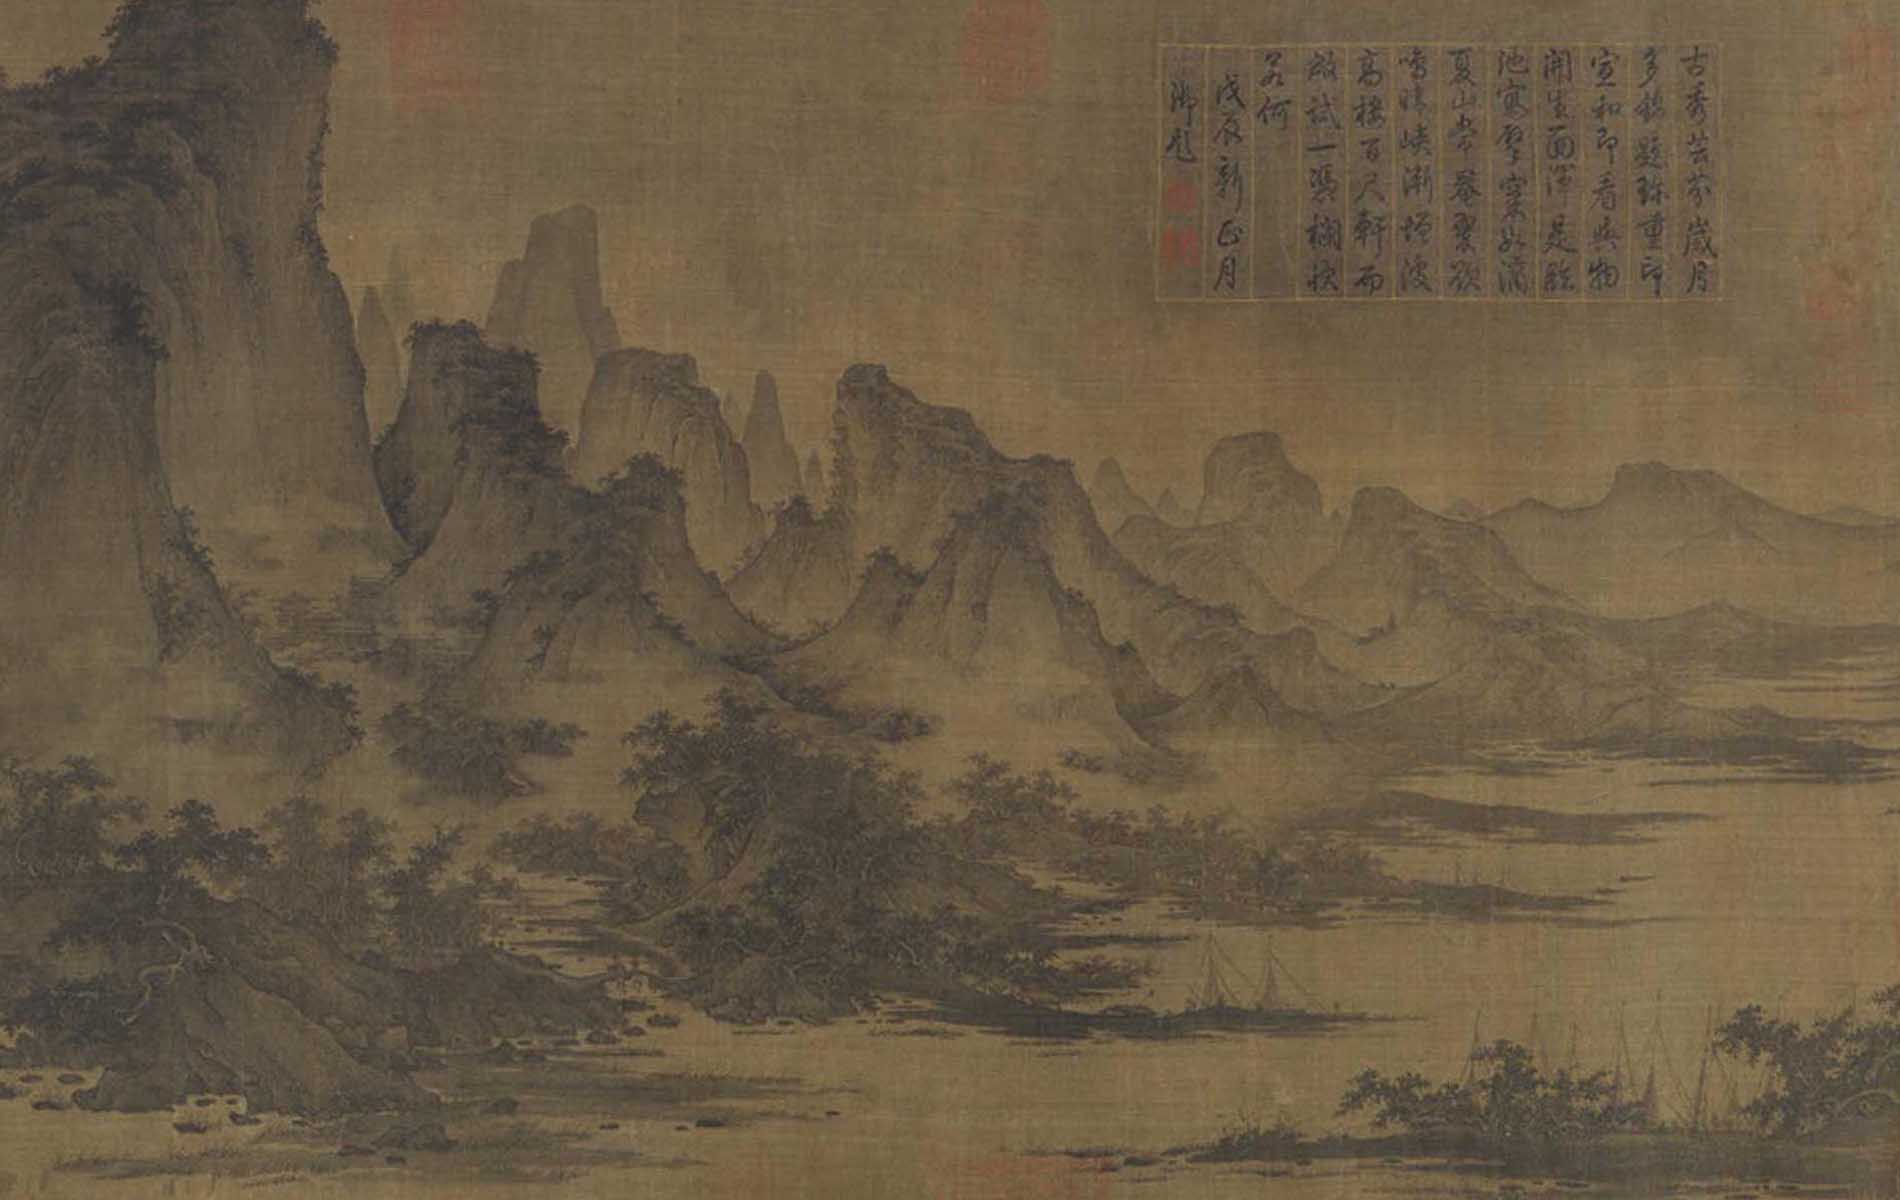 Chinese-Asian Art Dealers-Appraisers